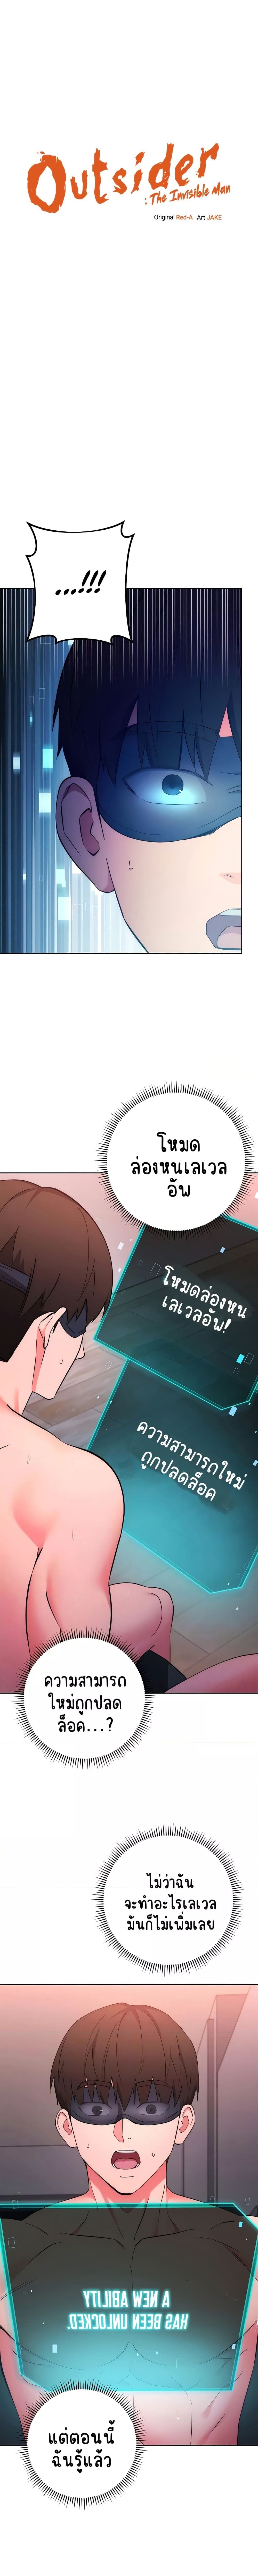 Outsider: The Invisible Man ตอนที่ 9 ภาพ 0